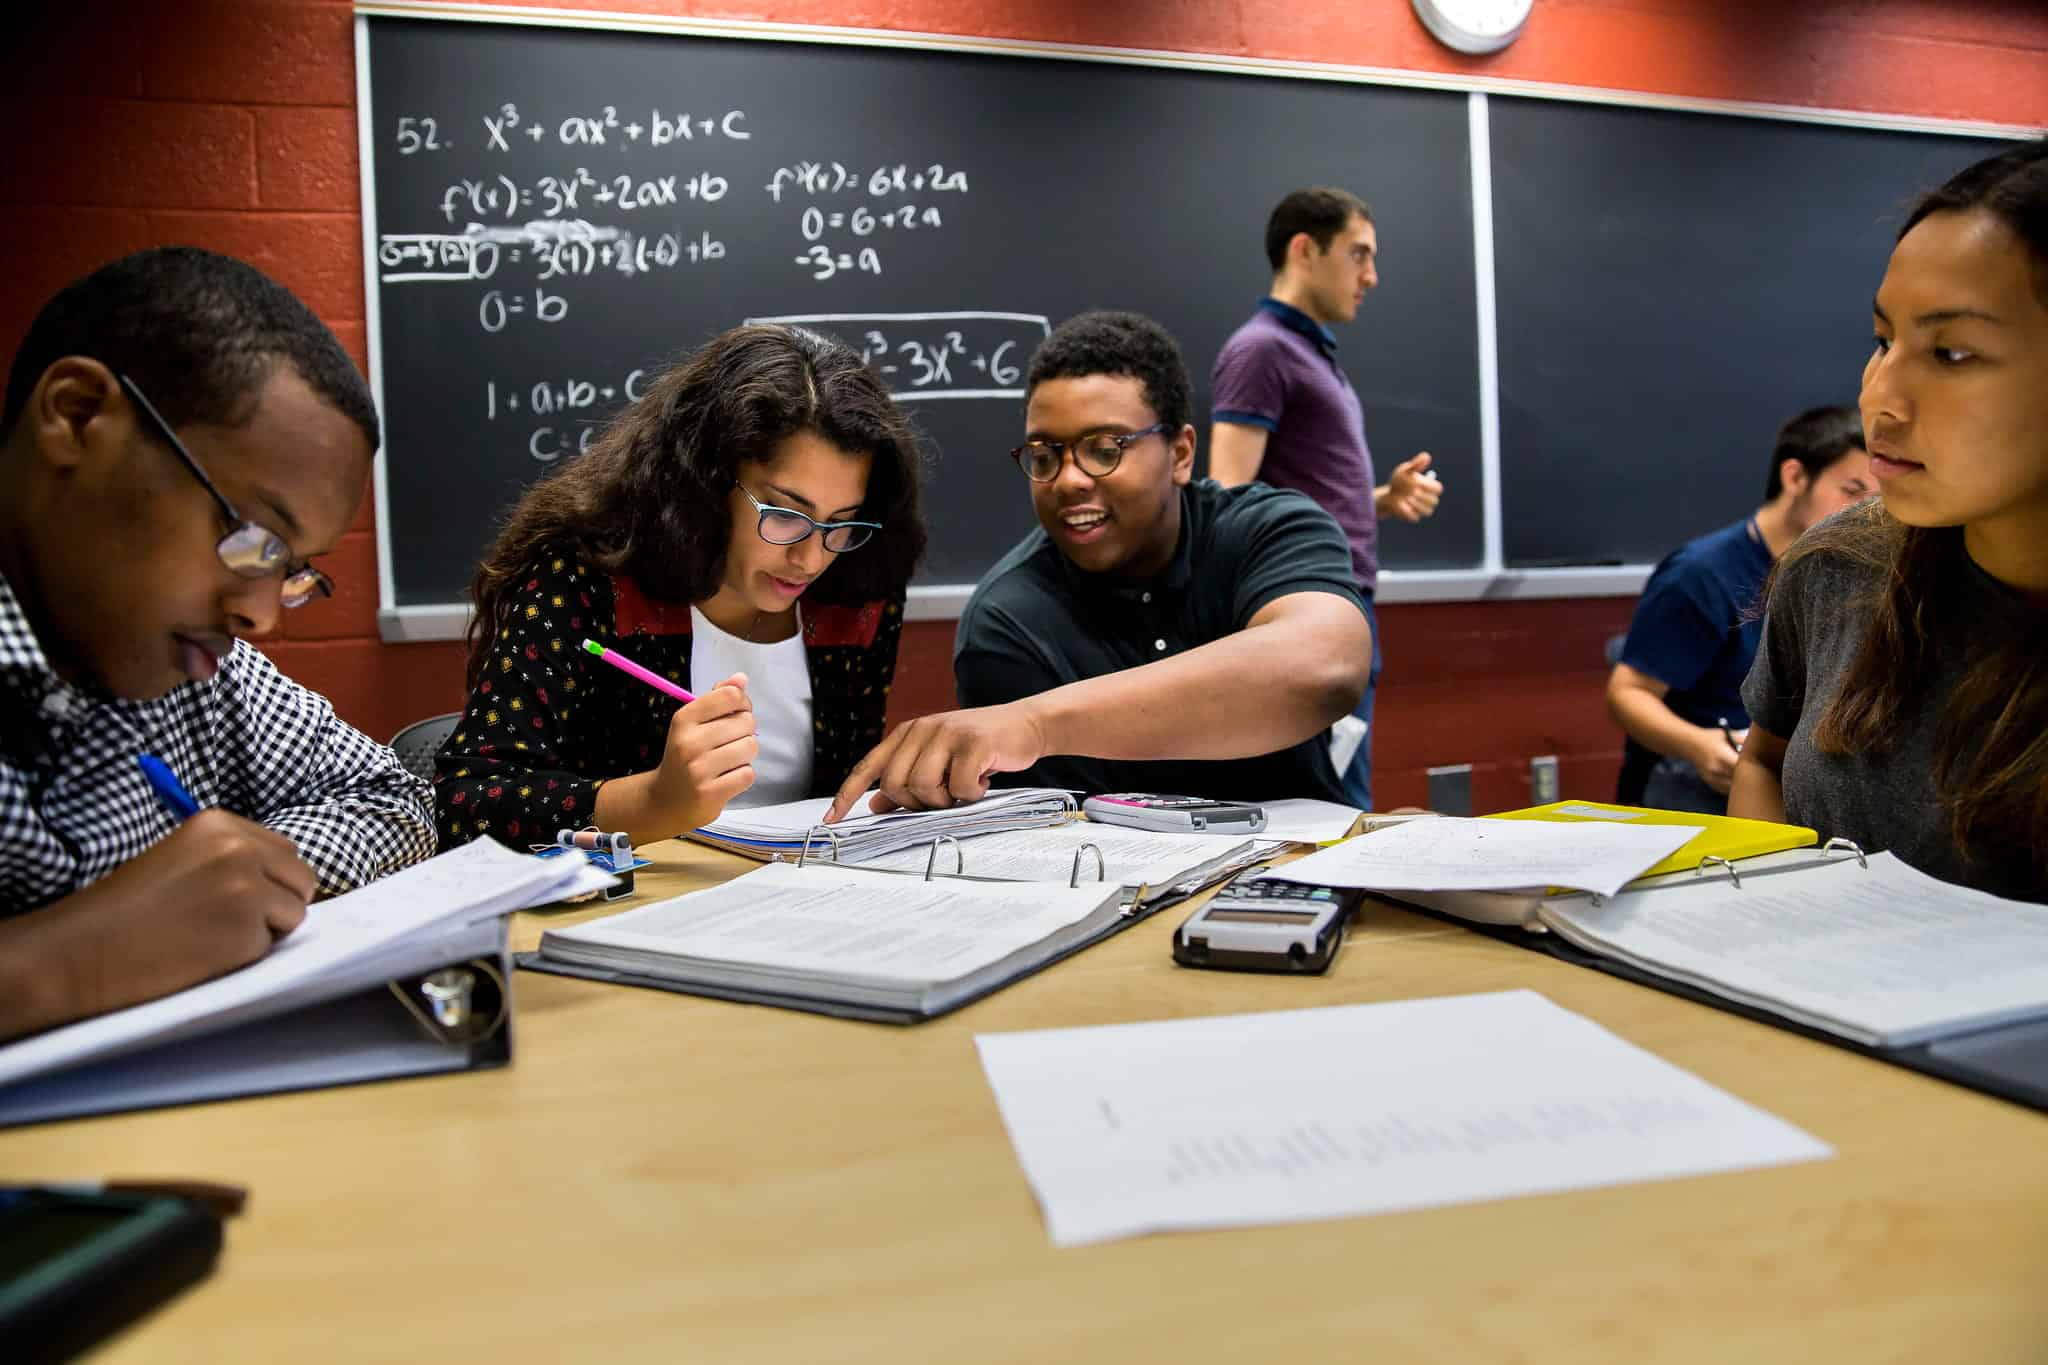 Four students of color work together at a table strewn with notebooks and calculators.